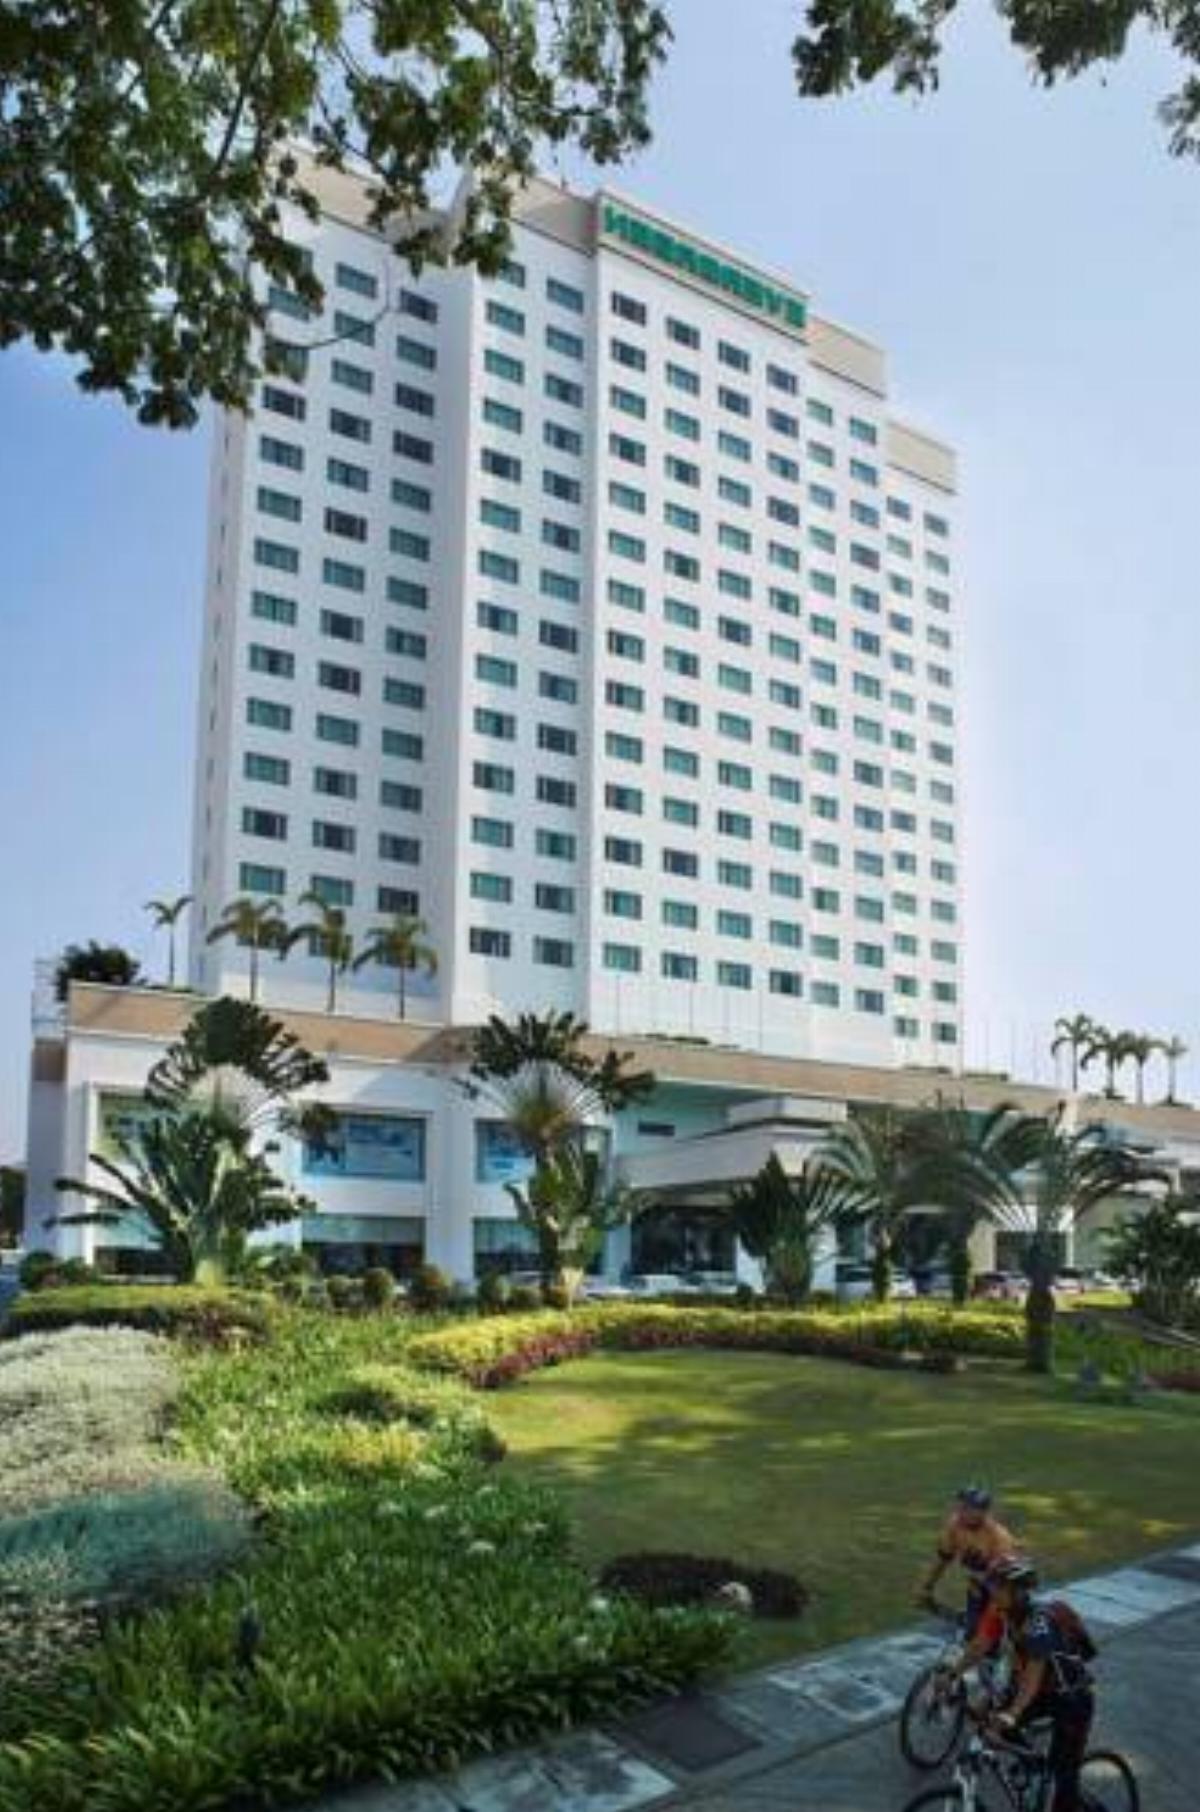 Evergreen Laurel Hotel Penang Hotel George Town Malaysia